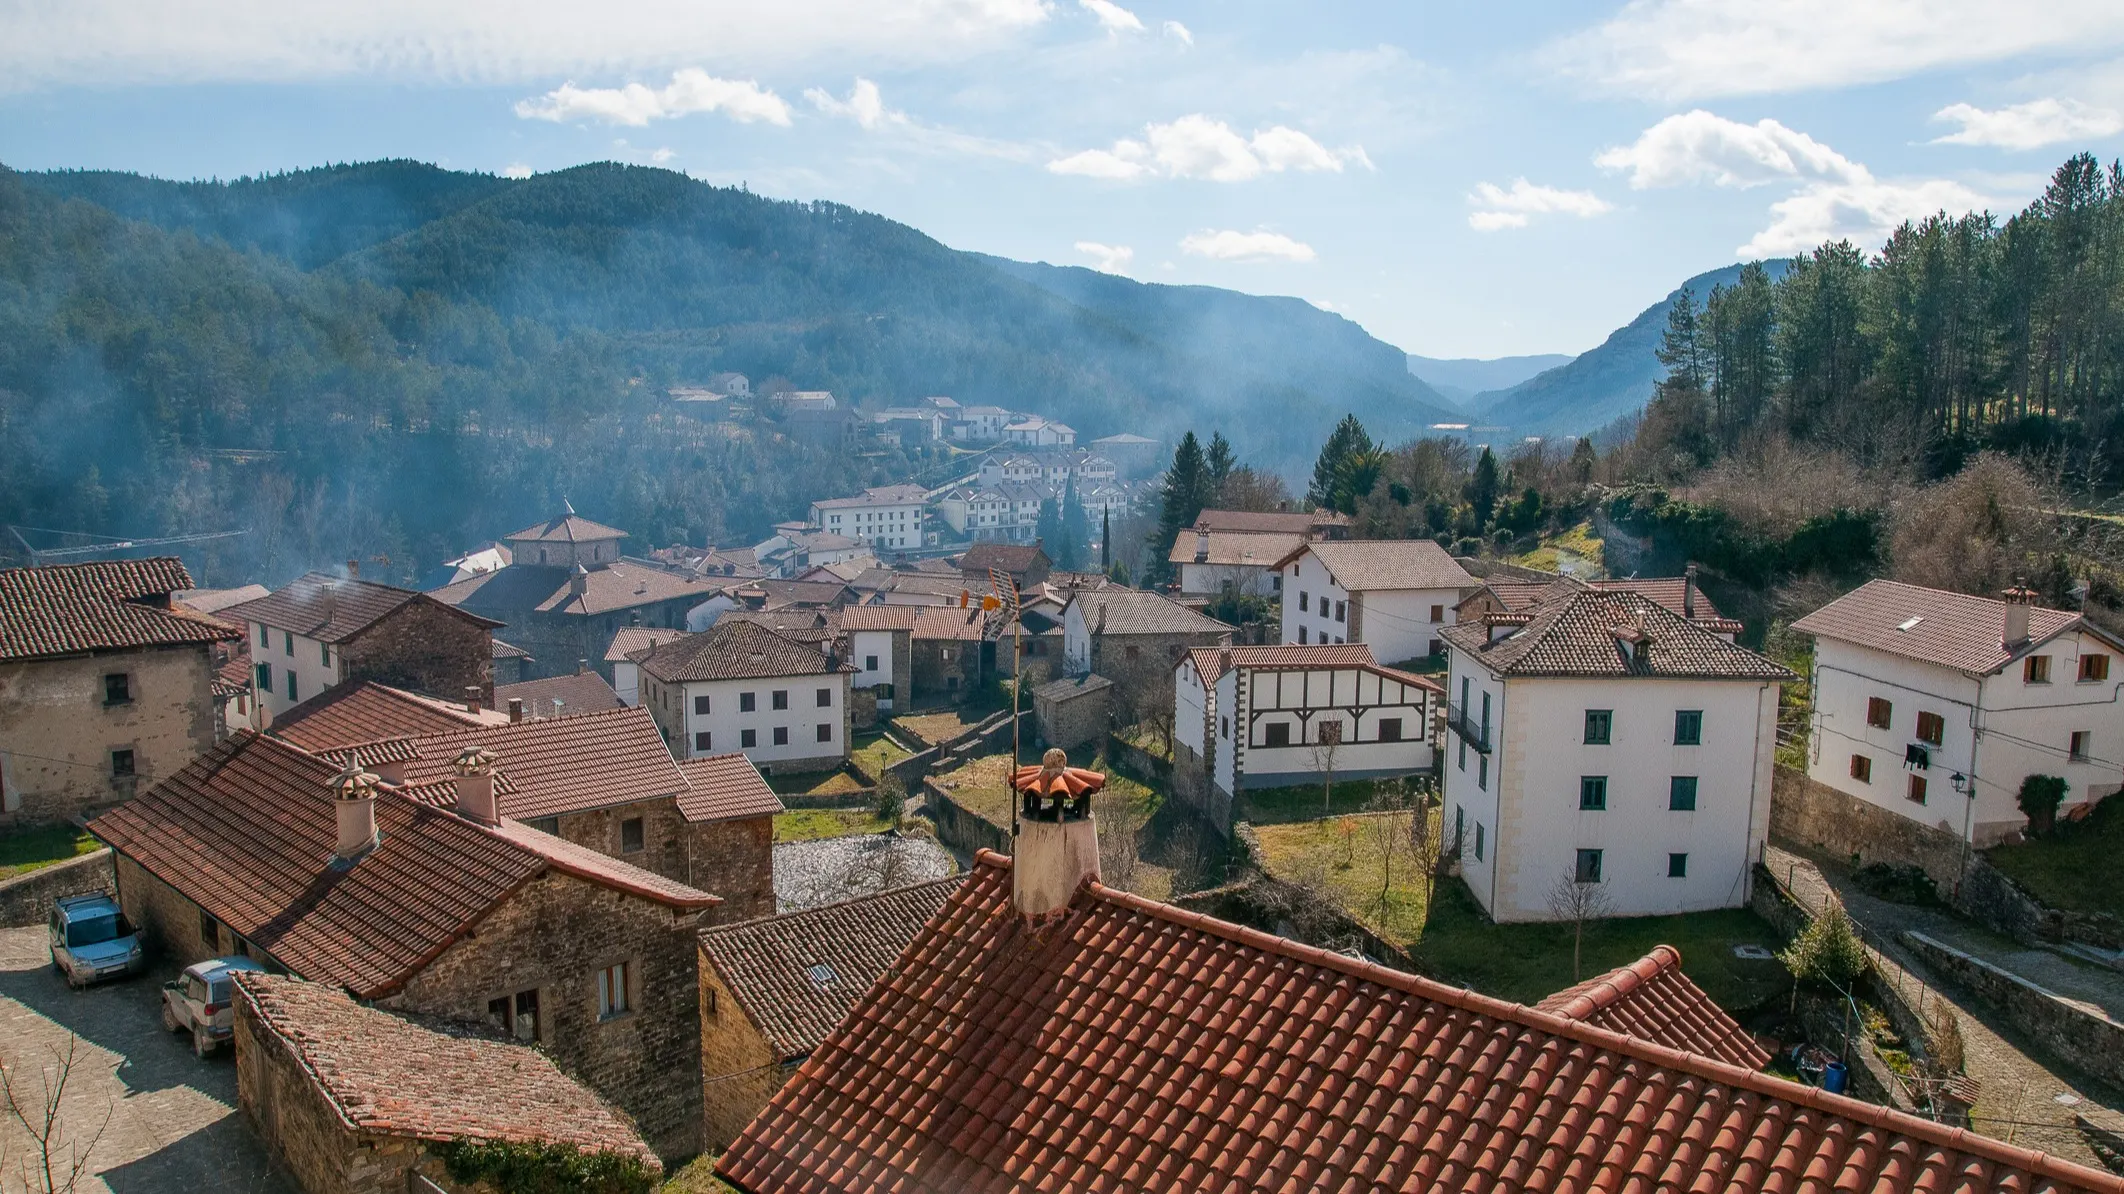 Spain’s Roncal-Erronkari, population 200, is a remarkably well-preserved medieval village.